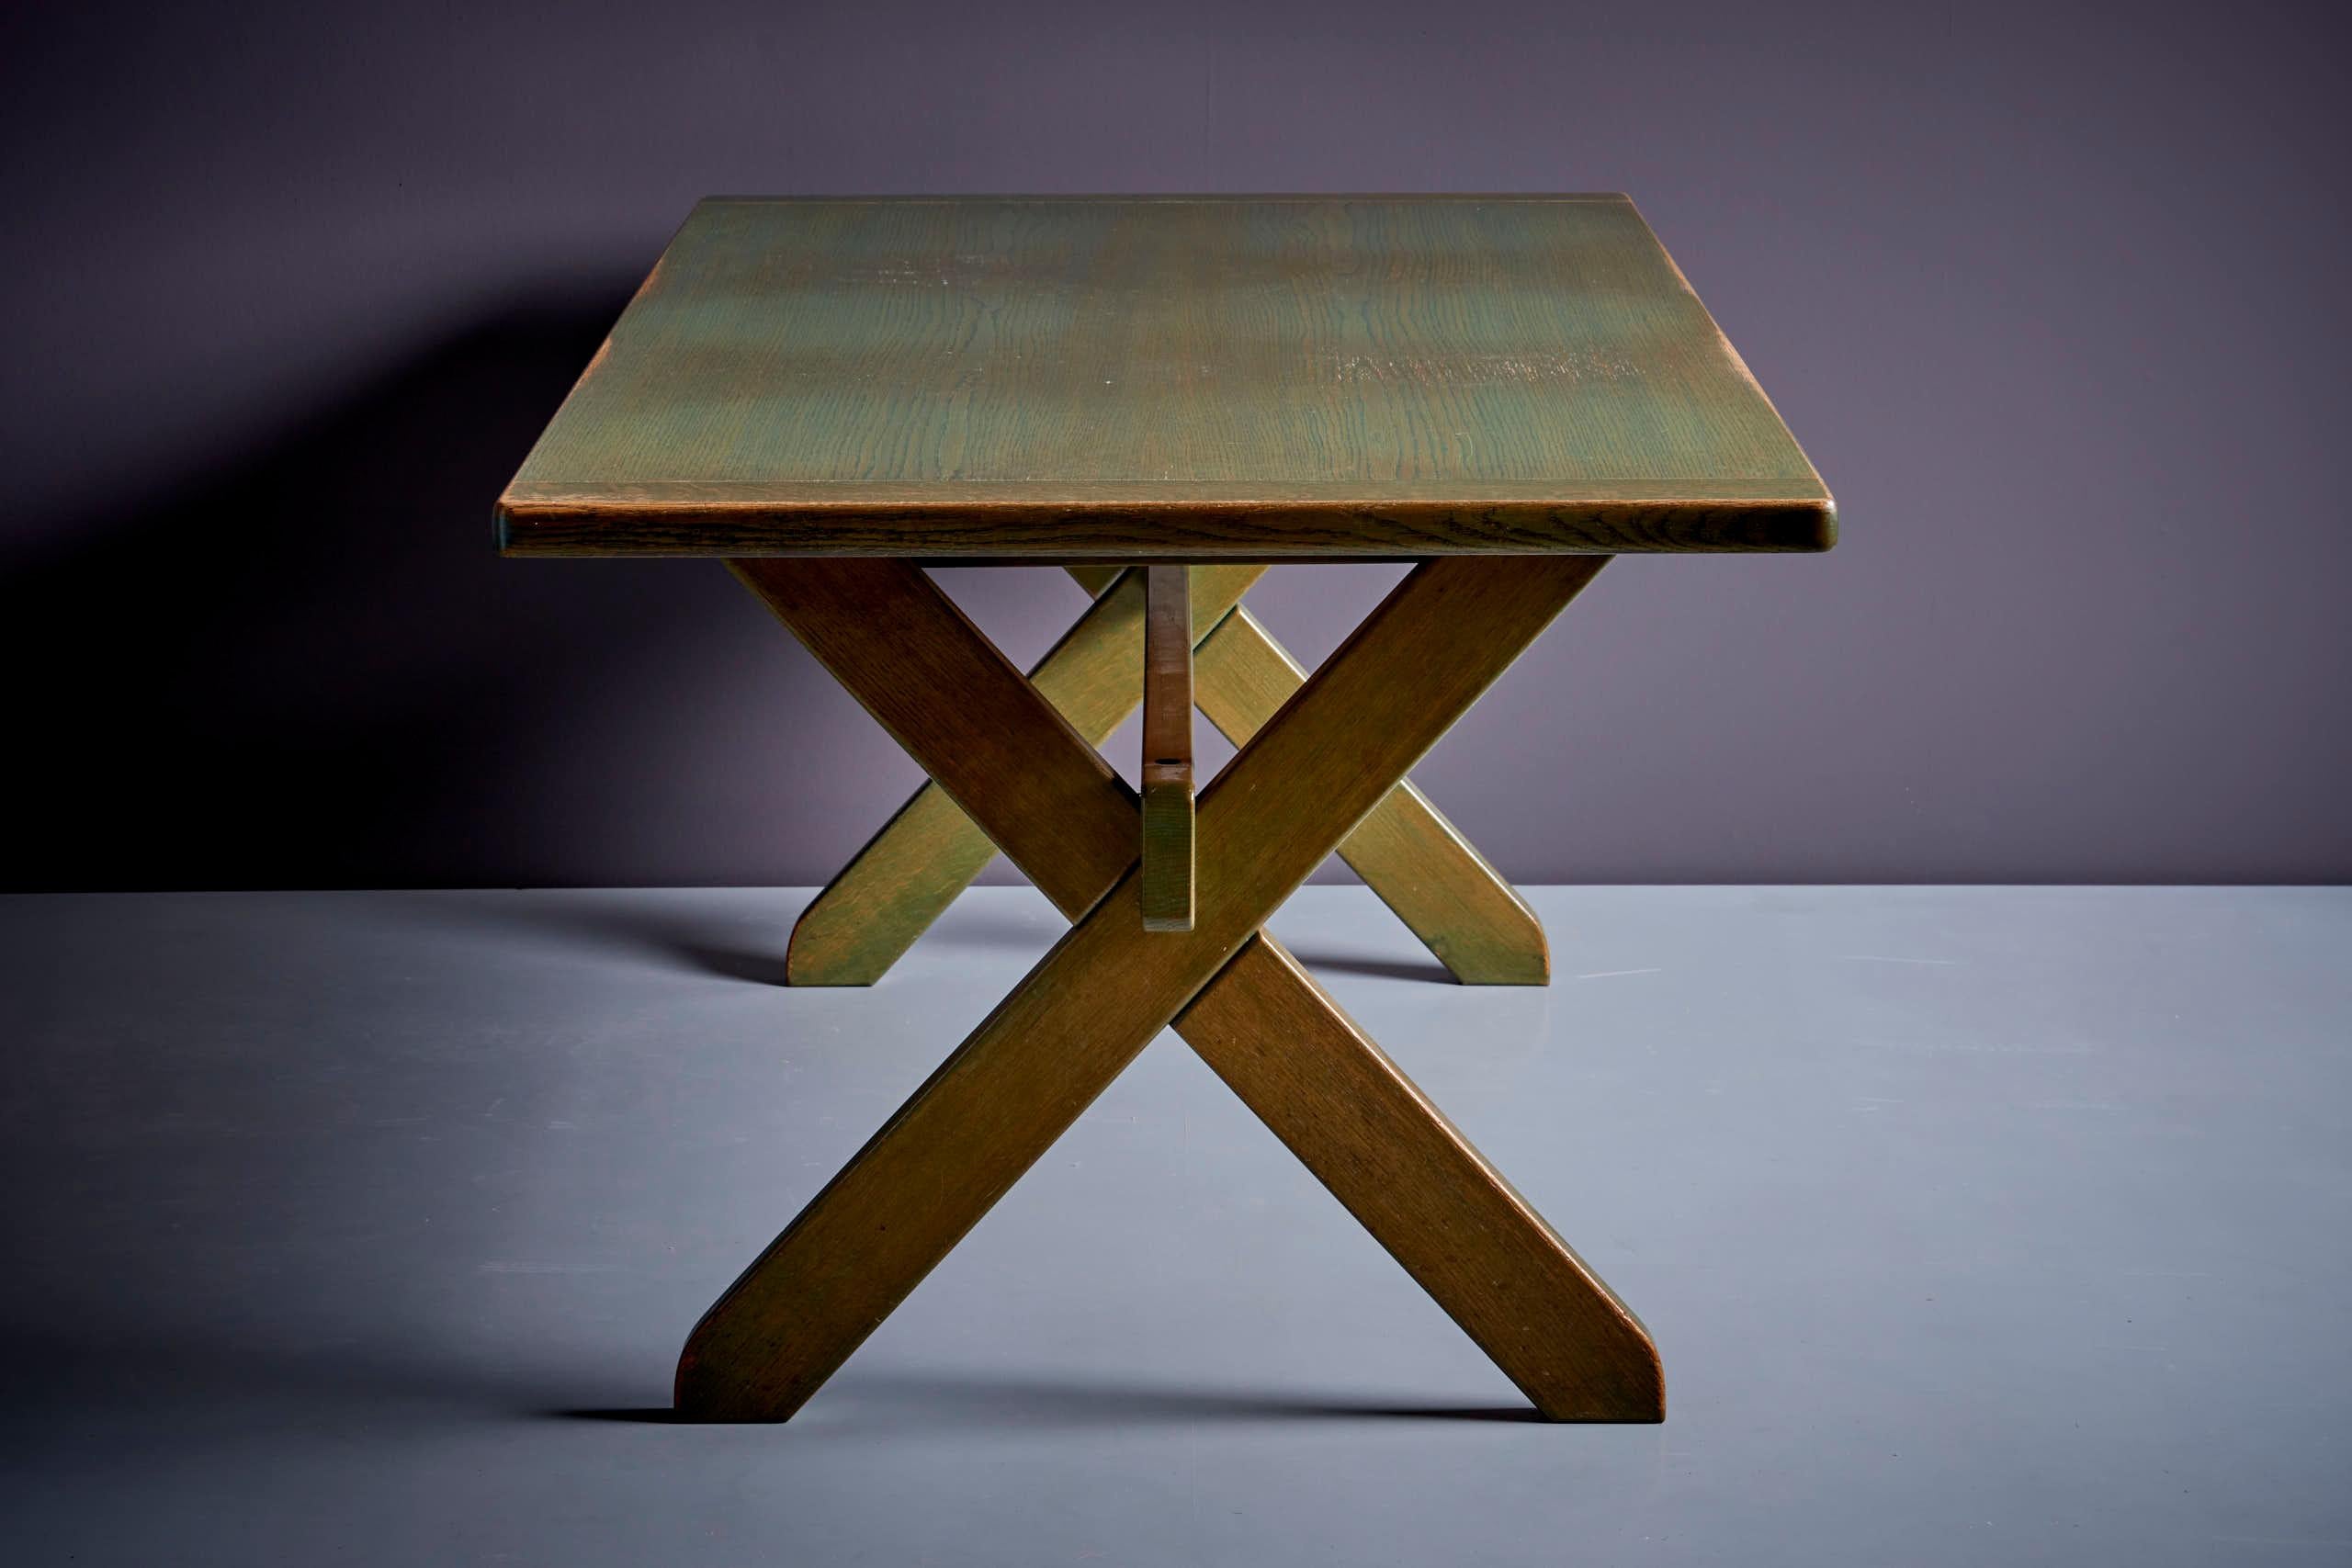 WK Möbel Dining Table in Green Pine Wood, Germany - 1960s For Sale 7